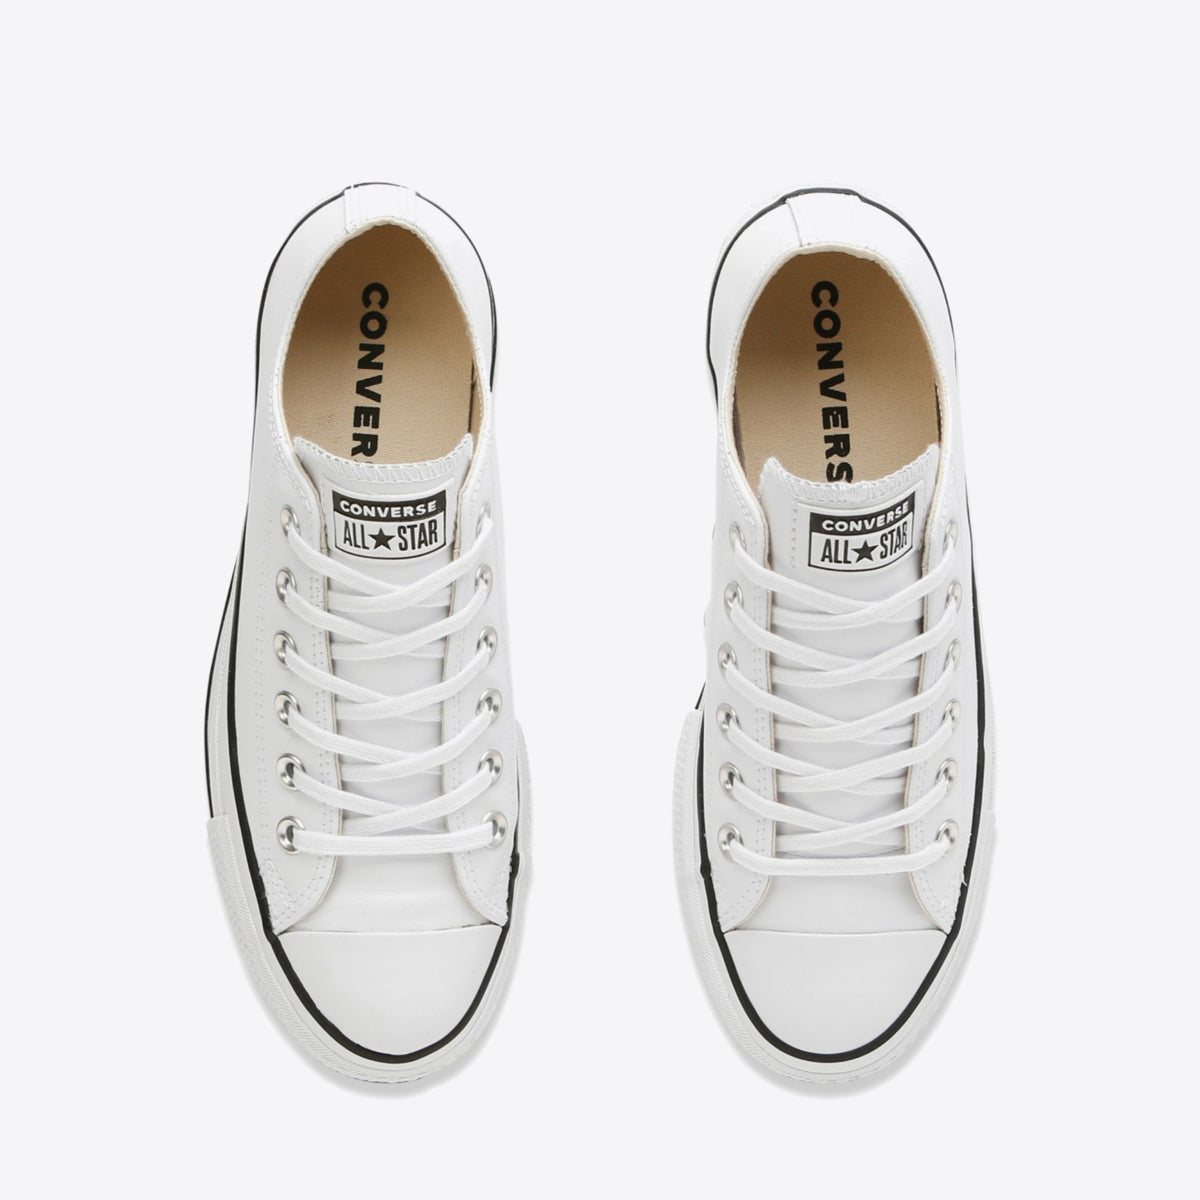  Chuck Taylor All Star Leather Lift Low White/Black